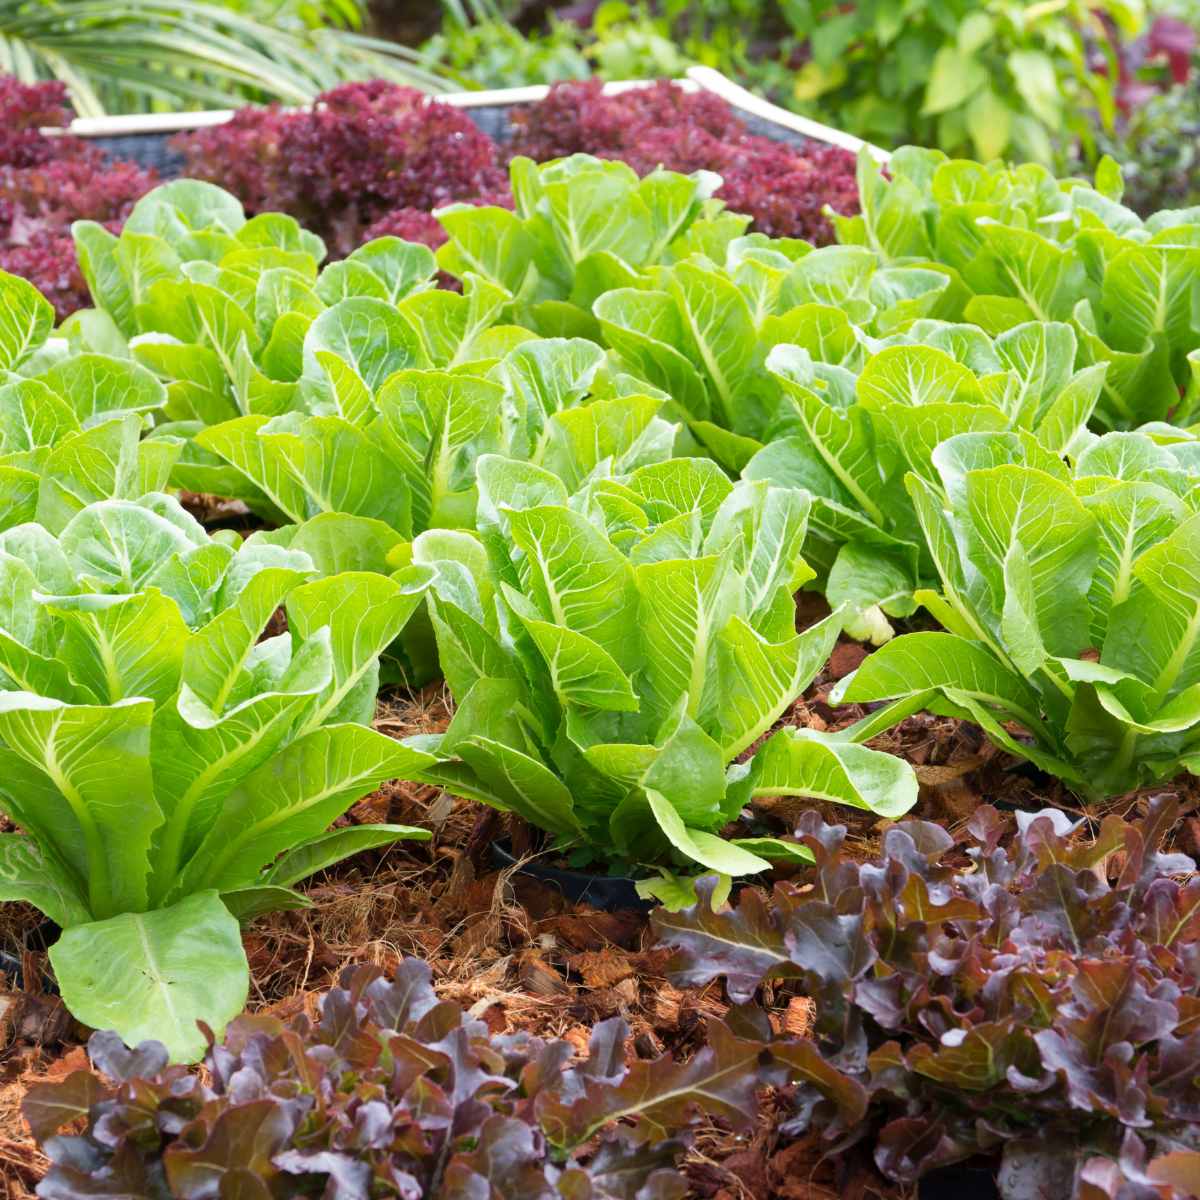 green and red lettuce growing in garden bed